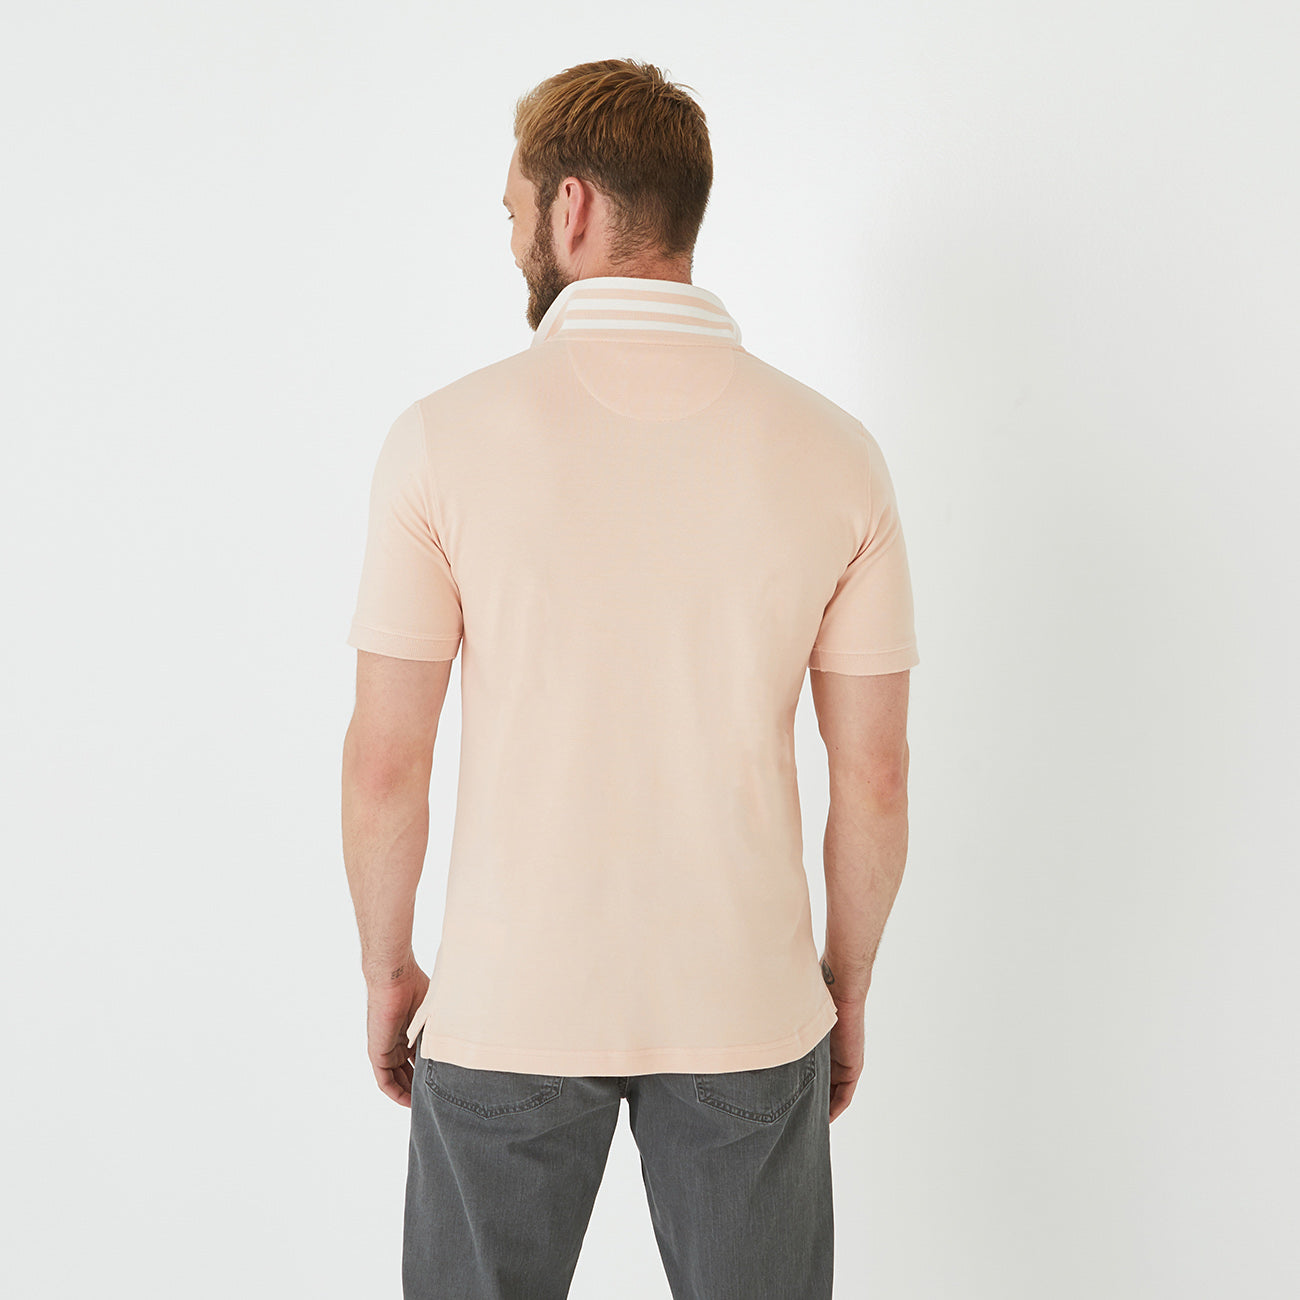 Eden Park Classic Light Peach Poloshirt with Sports Collar. Short sleeves and a classic collar poloshirt made from soft cotton pique. Available at StylishGuy Menswear Boutique Dublin.